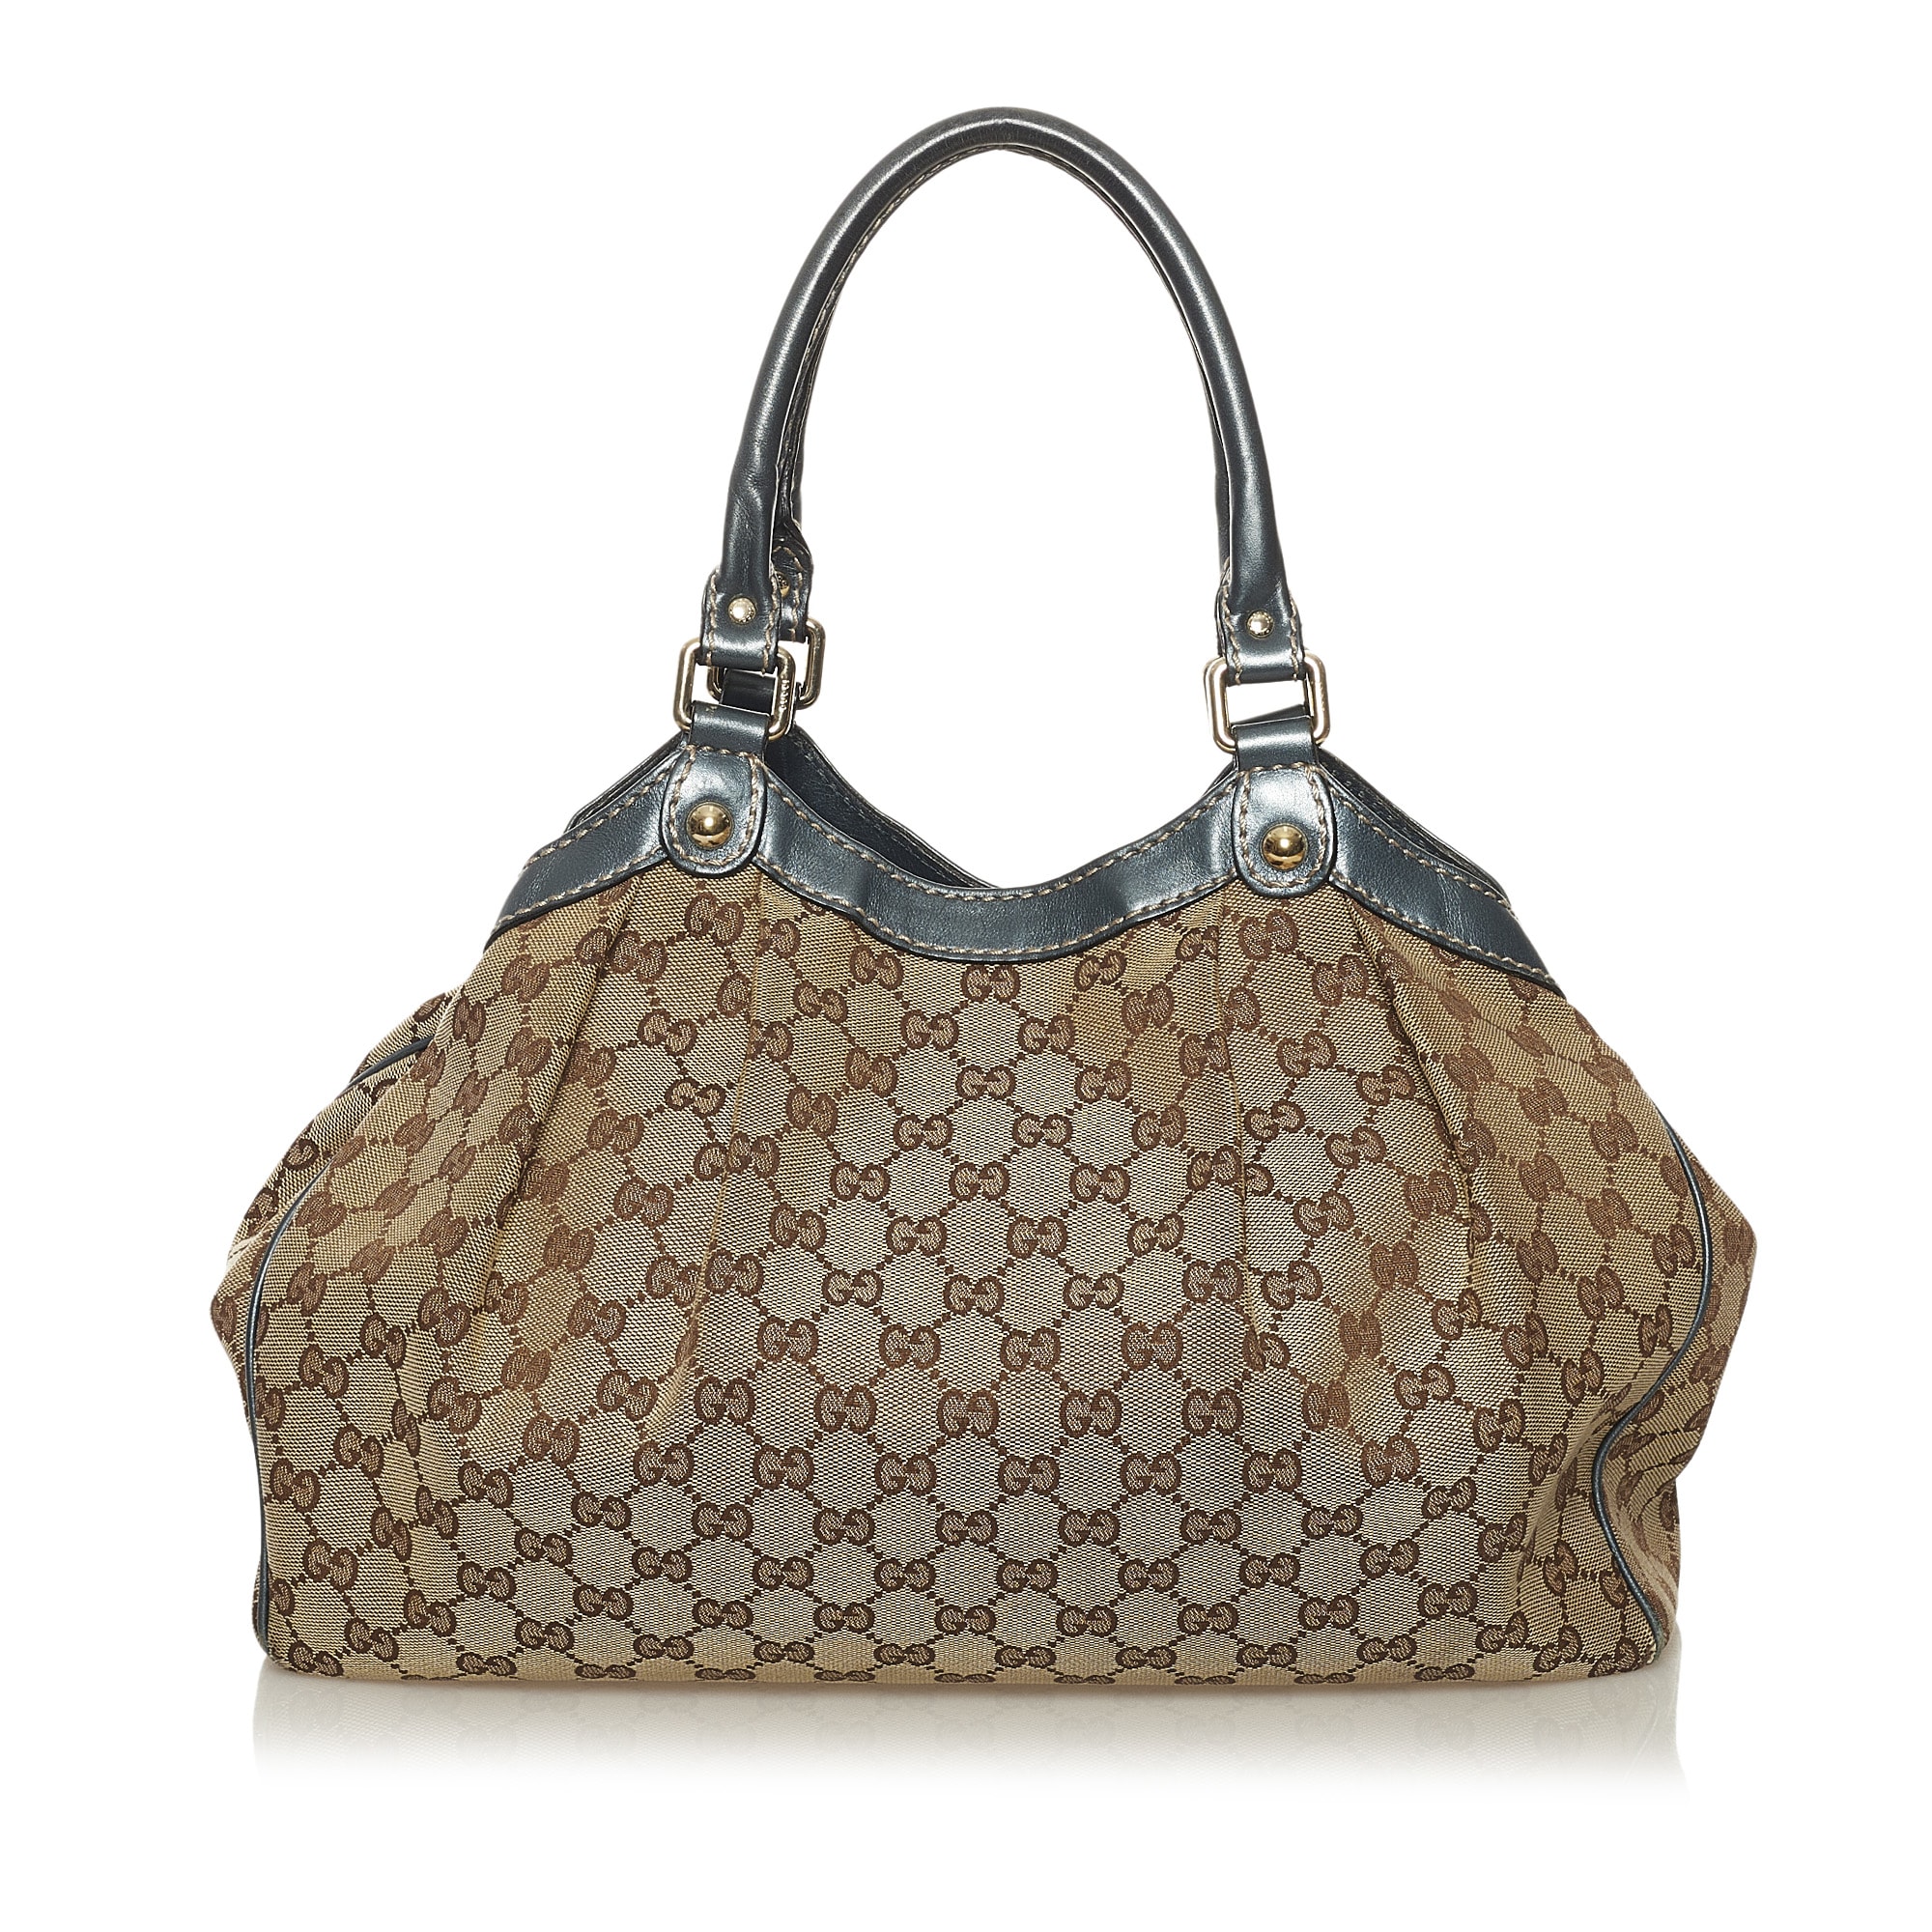 Gucci Gg Canvas Sukey Tote Bag, ONESIZE, beige